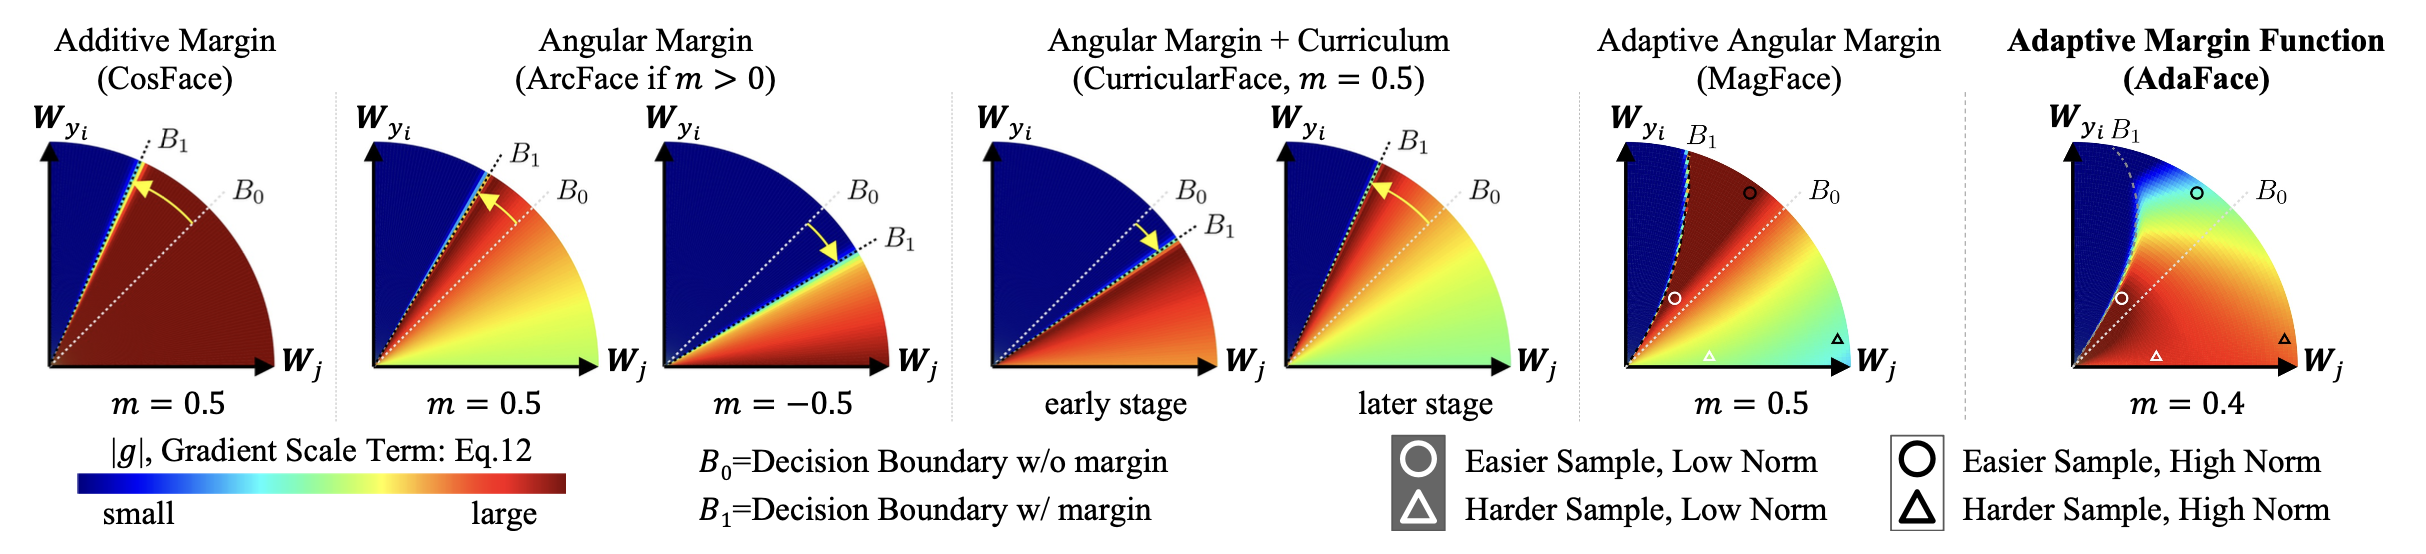 Comparison of different margin functions